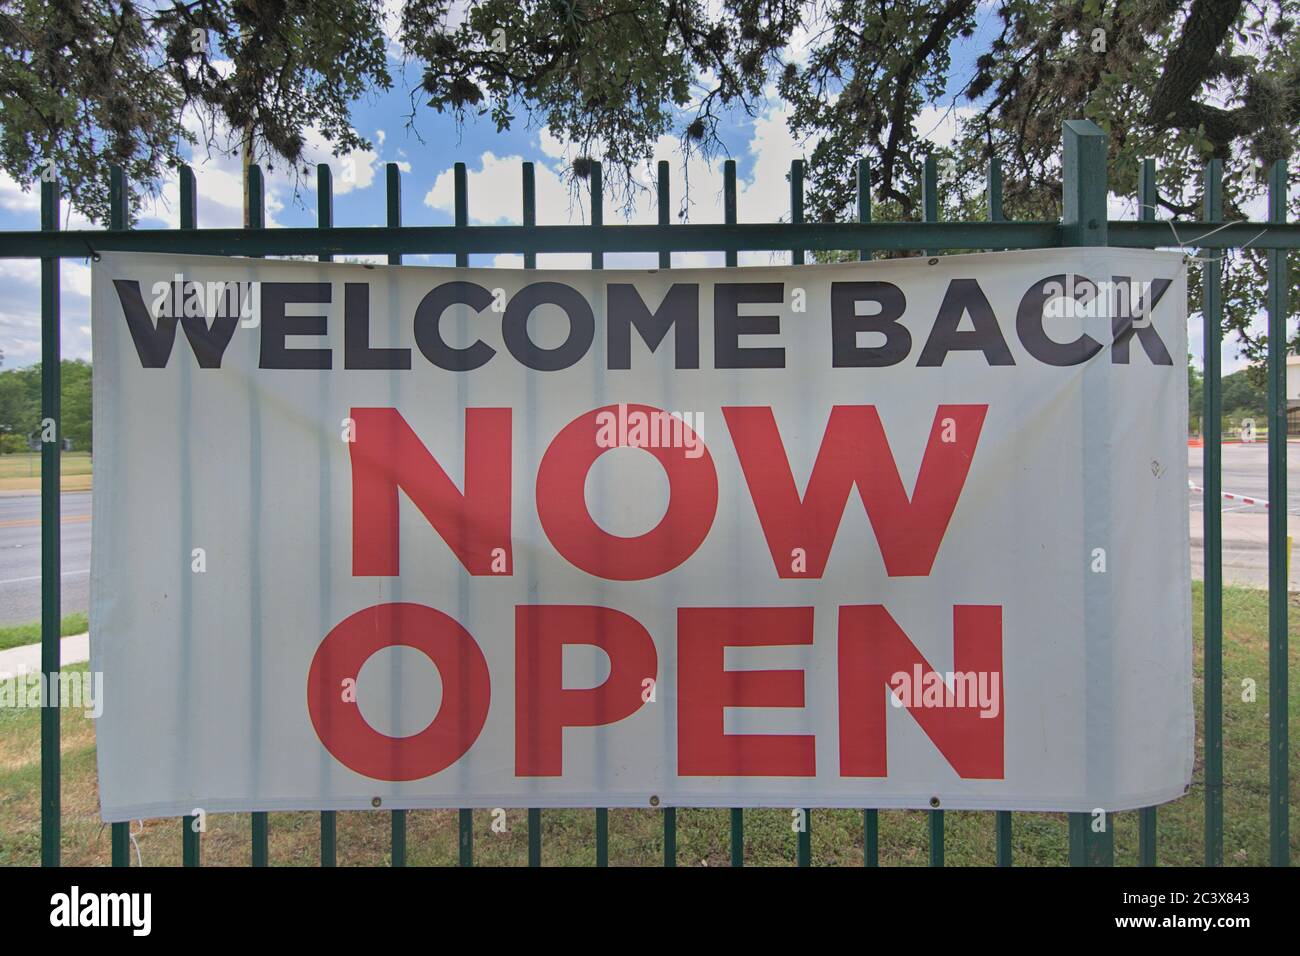 Welcome back now open sign showing businesses opening back up after covid 19 forced the shut down of the economy for months spiking cases. Stock Photo